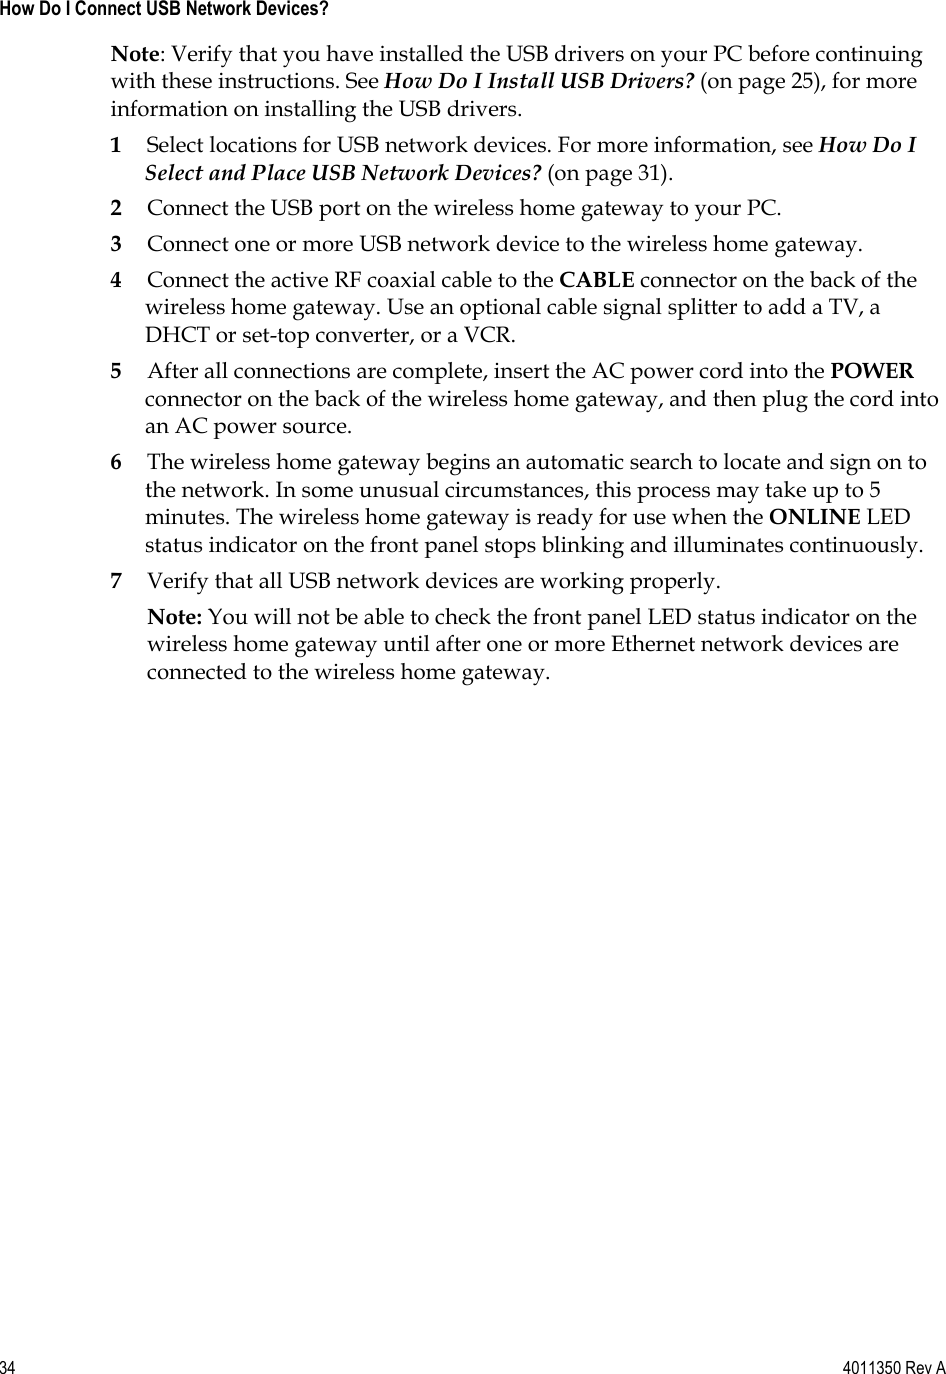 34    4011350 Rev A How Do I Connect USB Network Devices? Note: Verify that you have installed the USB drivers on your PC before continuing with these instructions. See How Do I Install USB Drivers? (on page 25), for more information on installing the USB drivers. 1Select locations for USB network devices. For more information, see How Do I Select and Place USB Network Devices? (on page 31). 2Connect the USB port on the wireless home gateway to your PC. 3Connect one or more USB network device to the wireless home gateway. 4Connect the active RF coaxial cable to the CABLE connector on the back of the wireless home gateway. Use an optional cable signal splitter to add a TV, a DHCT or set-top converter, or a VCR. 5After all connections are complete, insert the AC power cord into the POWERconnector on the back of the wireless home gateway, and then plug the cord into an AC power source. 6The wireless home gateway begins an automatic search to locate and sign on to the network. In some unusual circumstances, this process may take up to 5 minutes. The wireless home gateway is ready for use when the ONLINE LEDstatus indicator on the front panel stops blinking and illuminates continuously. 7Verify that all USB network devices are working properly. Note: You will not be able to check the front panel LED status indicator on the wireless home gateway until after one or more Ethernet network devices are connected to the wireless home gateway. 